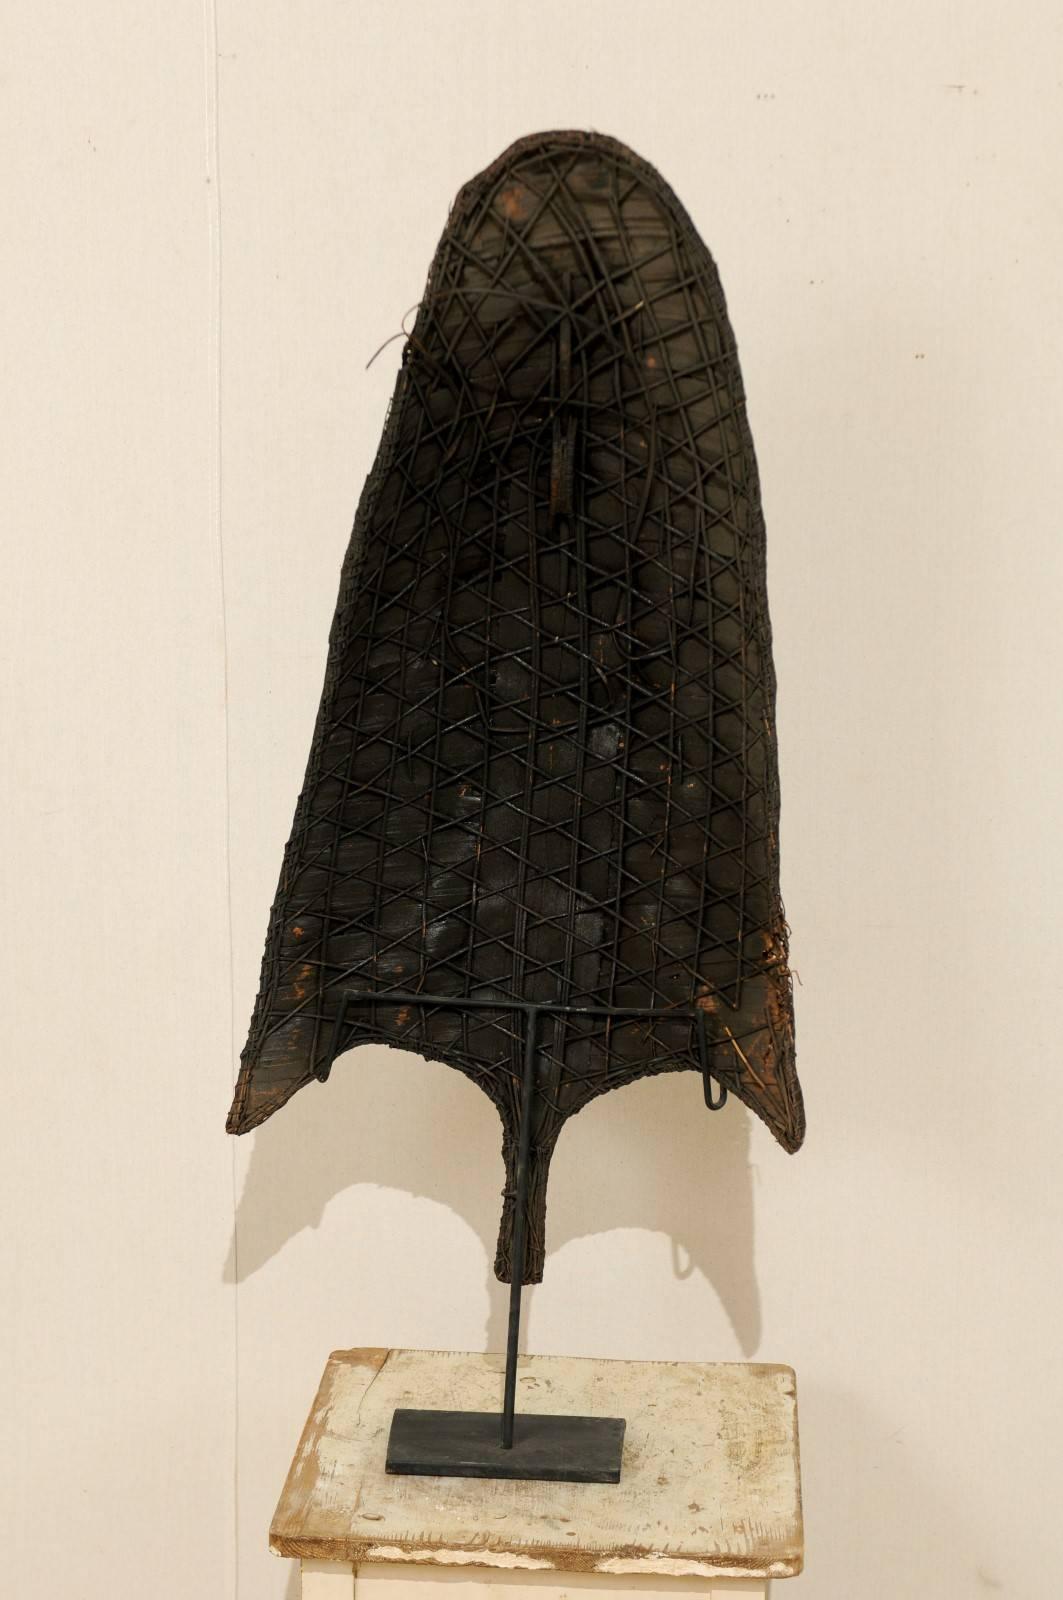 A Naga rain shield on custom iron stand from the Northeastern part of India. This Naga rain shield from the mid-20th century is constructed from interwoven cane and fiber and is beautifully aged. The shield is held upright on a custom black iron